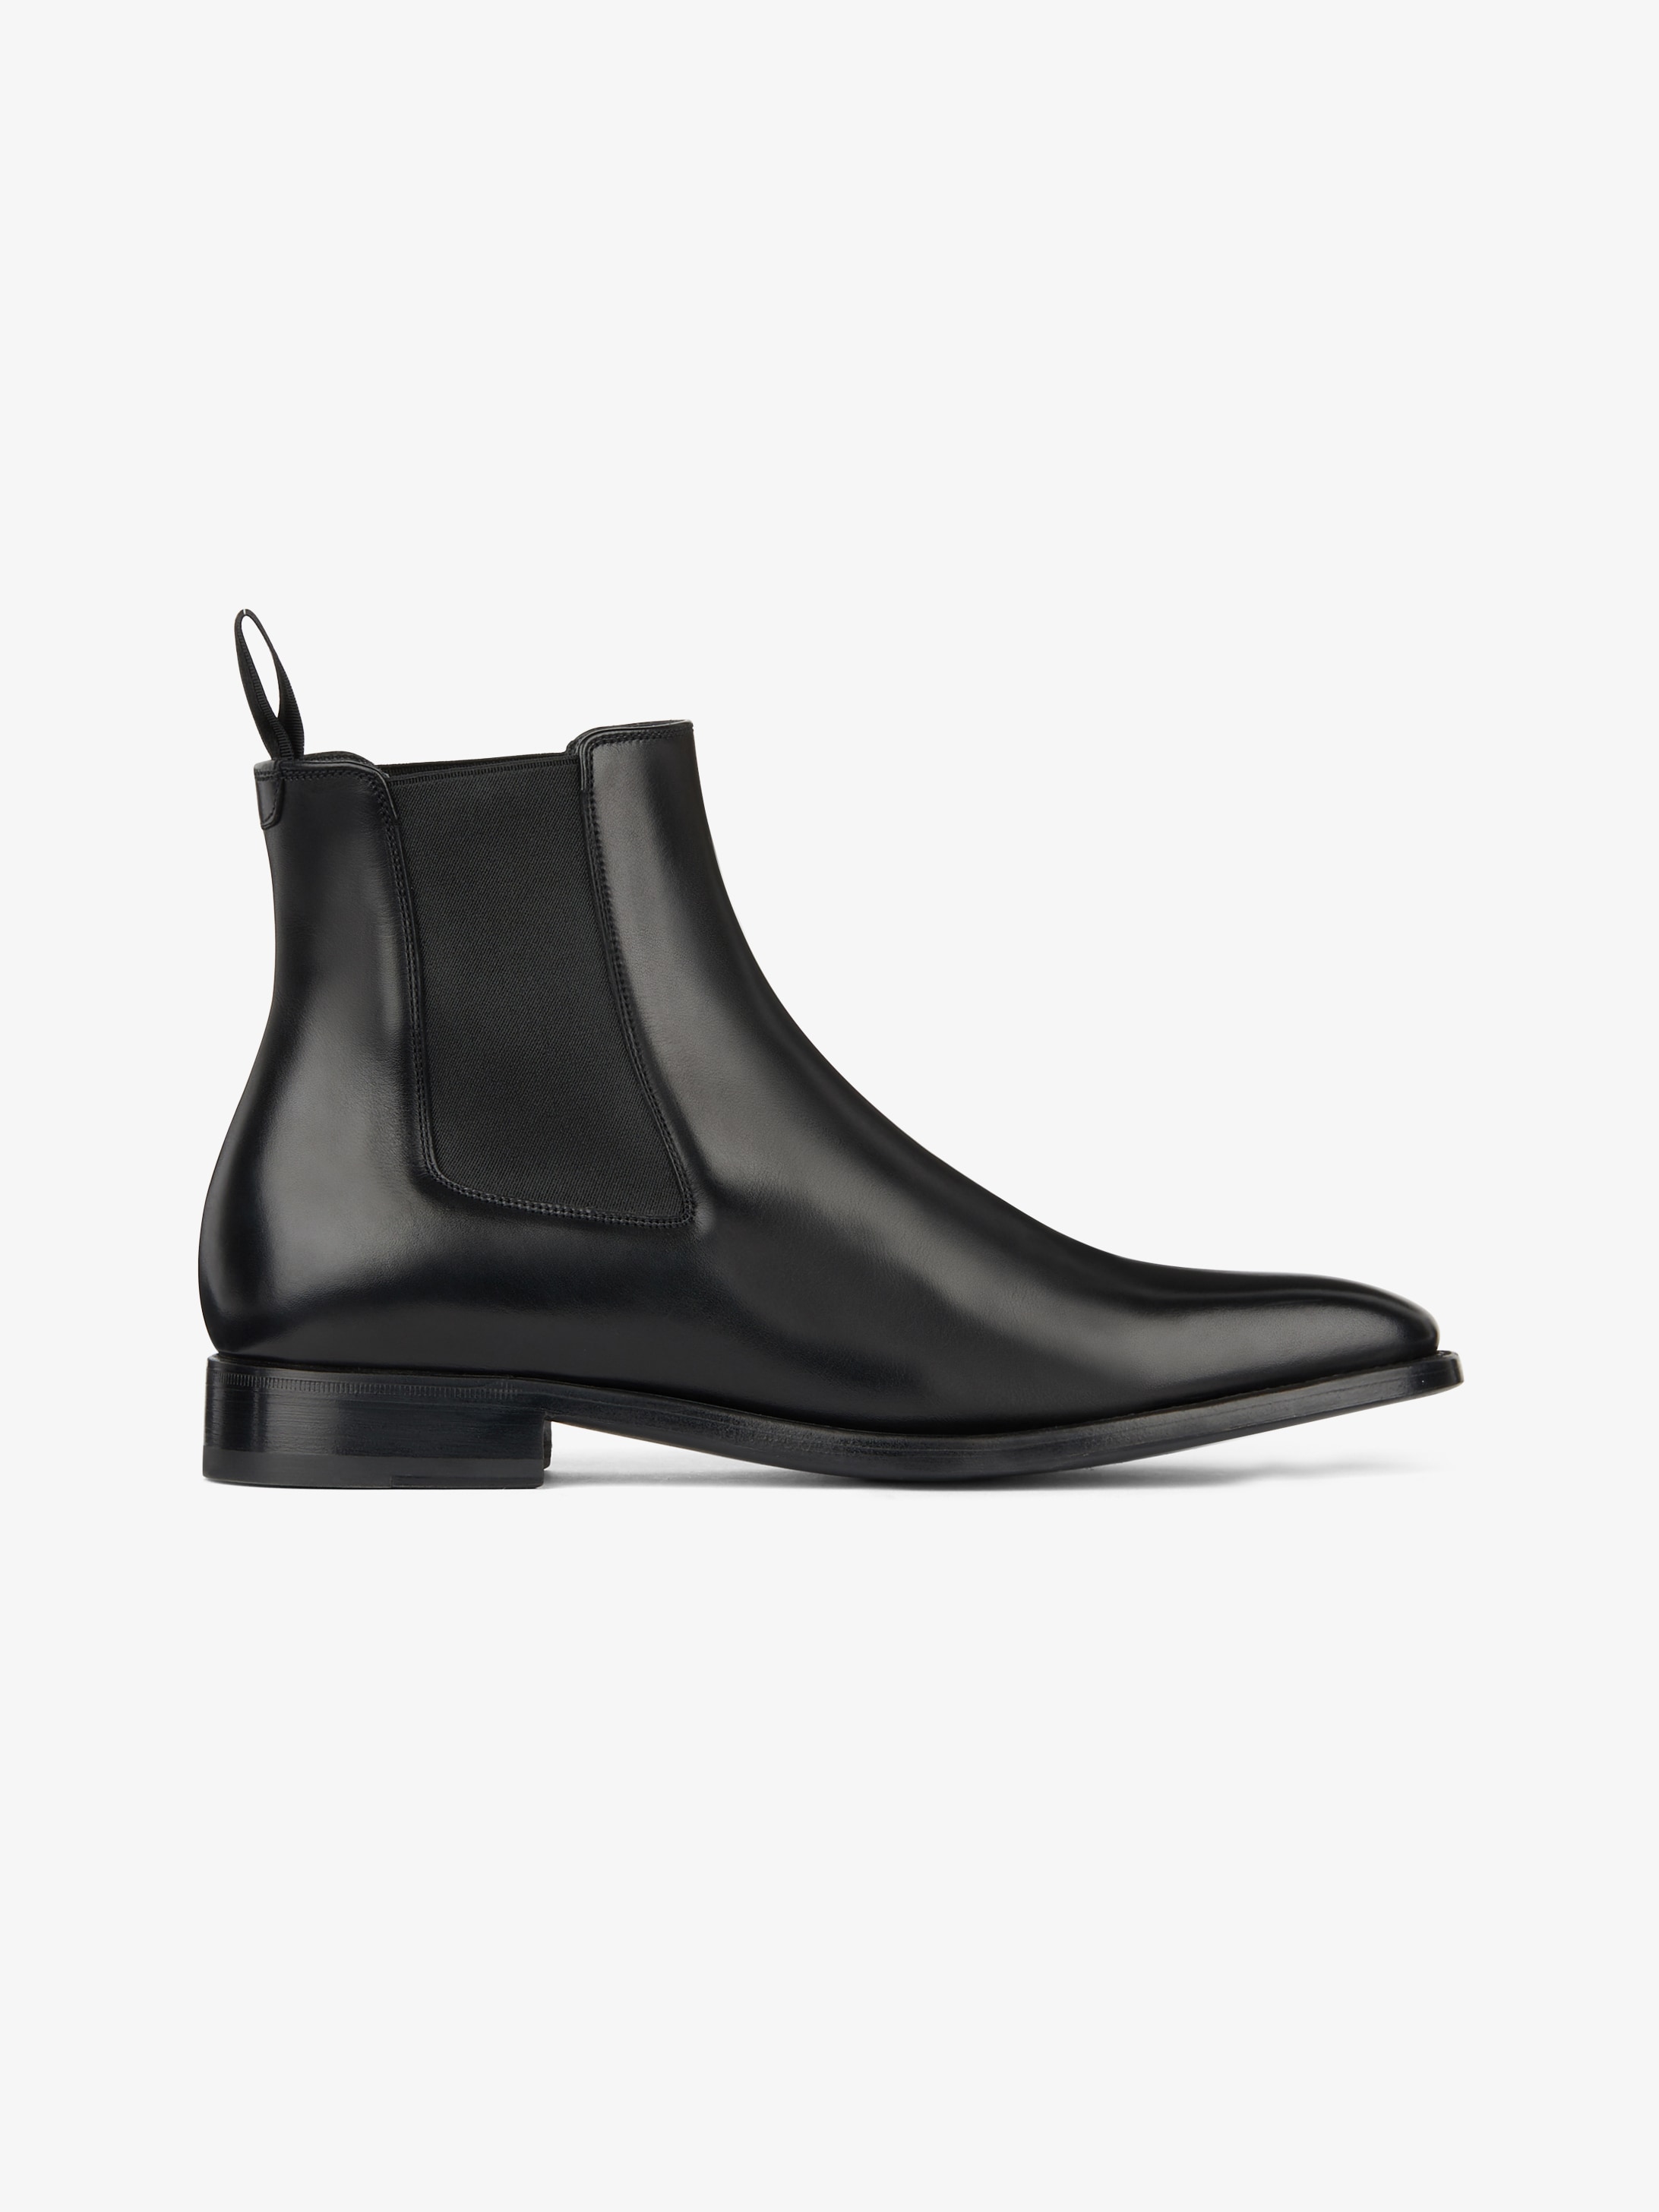 Chelsea boots in leather | GIVENCHY Paris